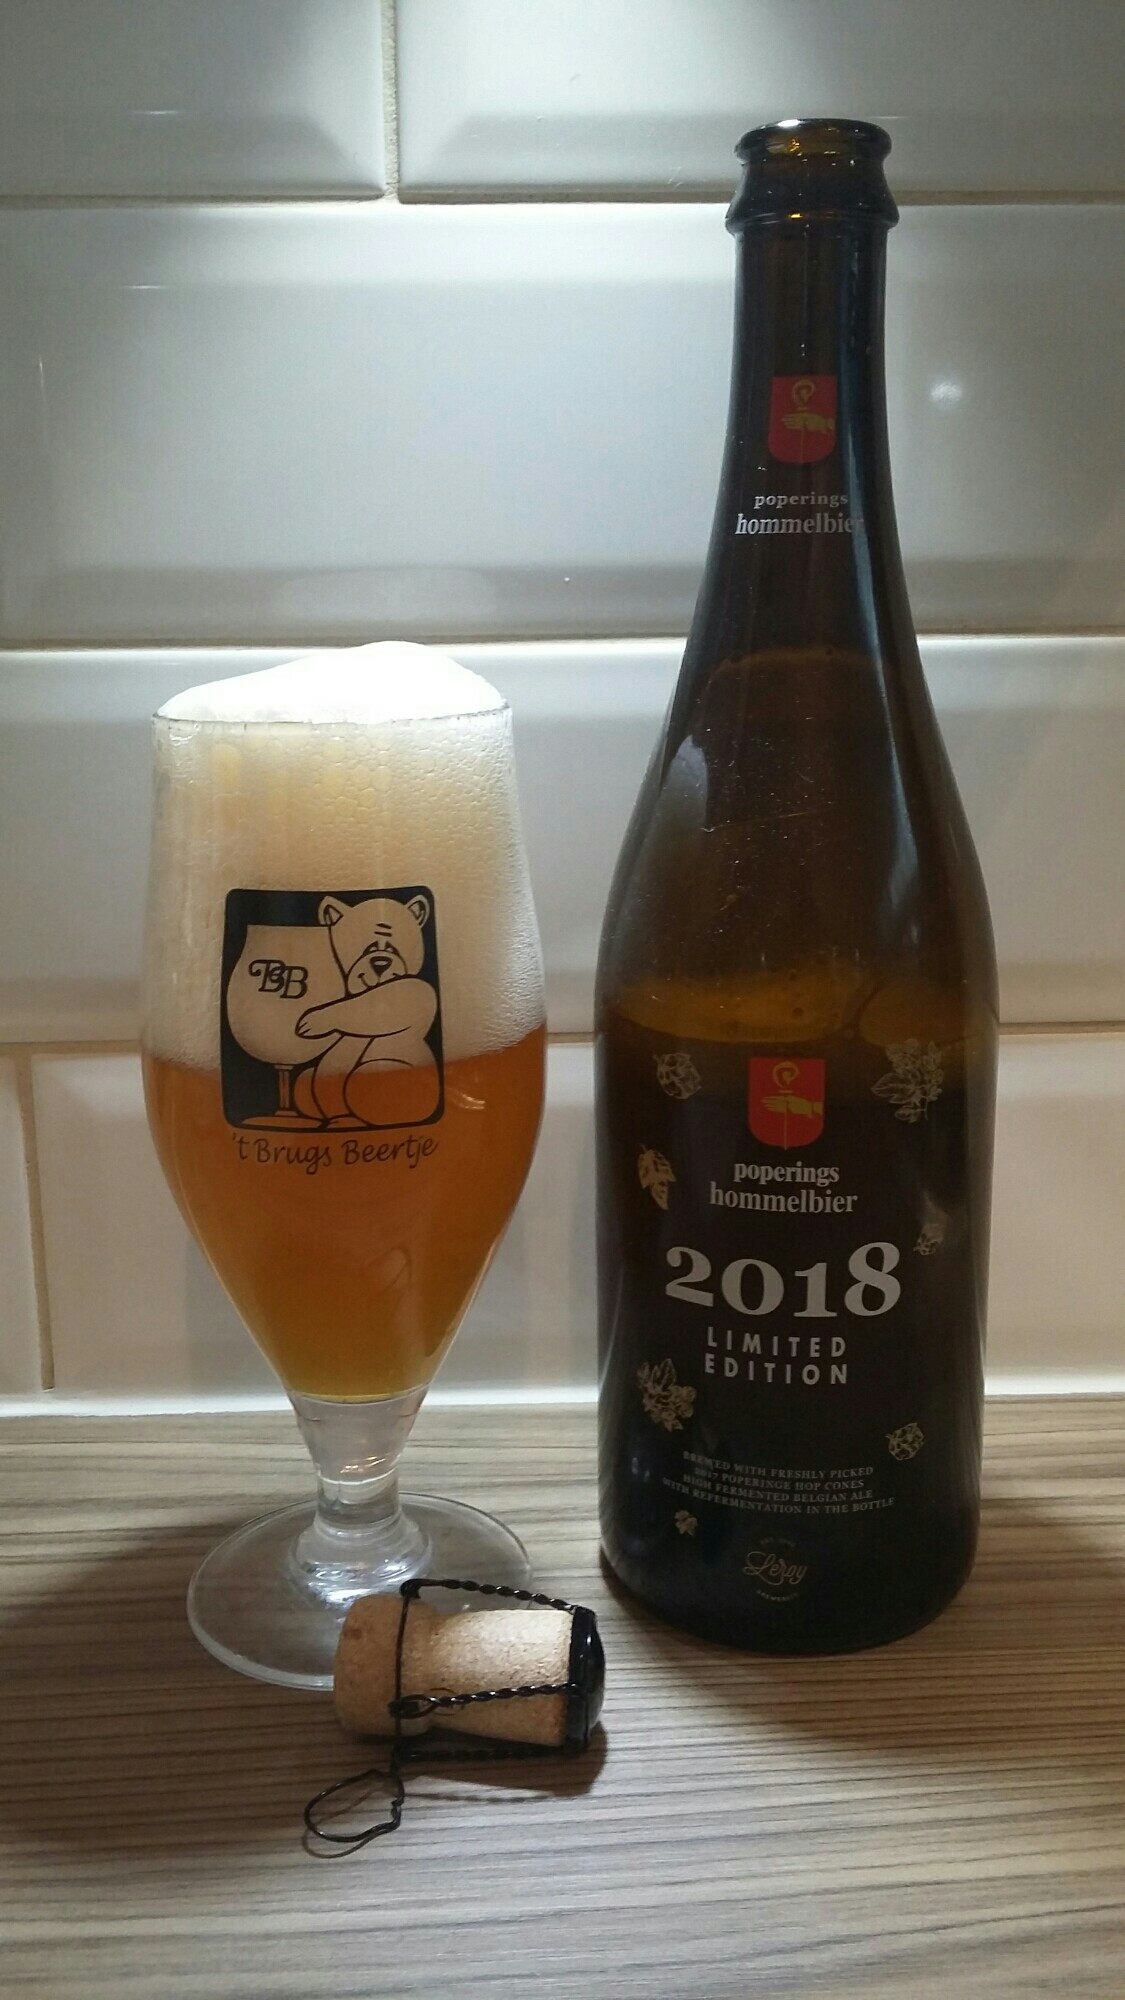 Hommelbier Limited Edition 2018